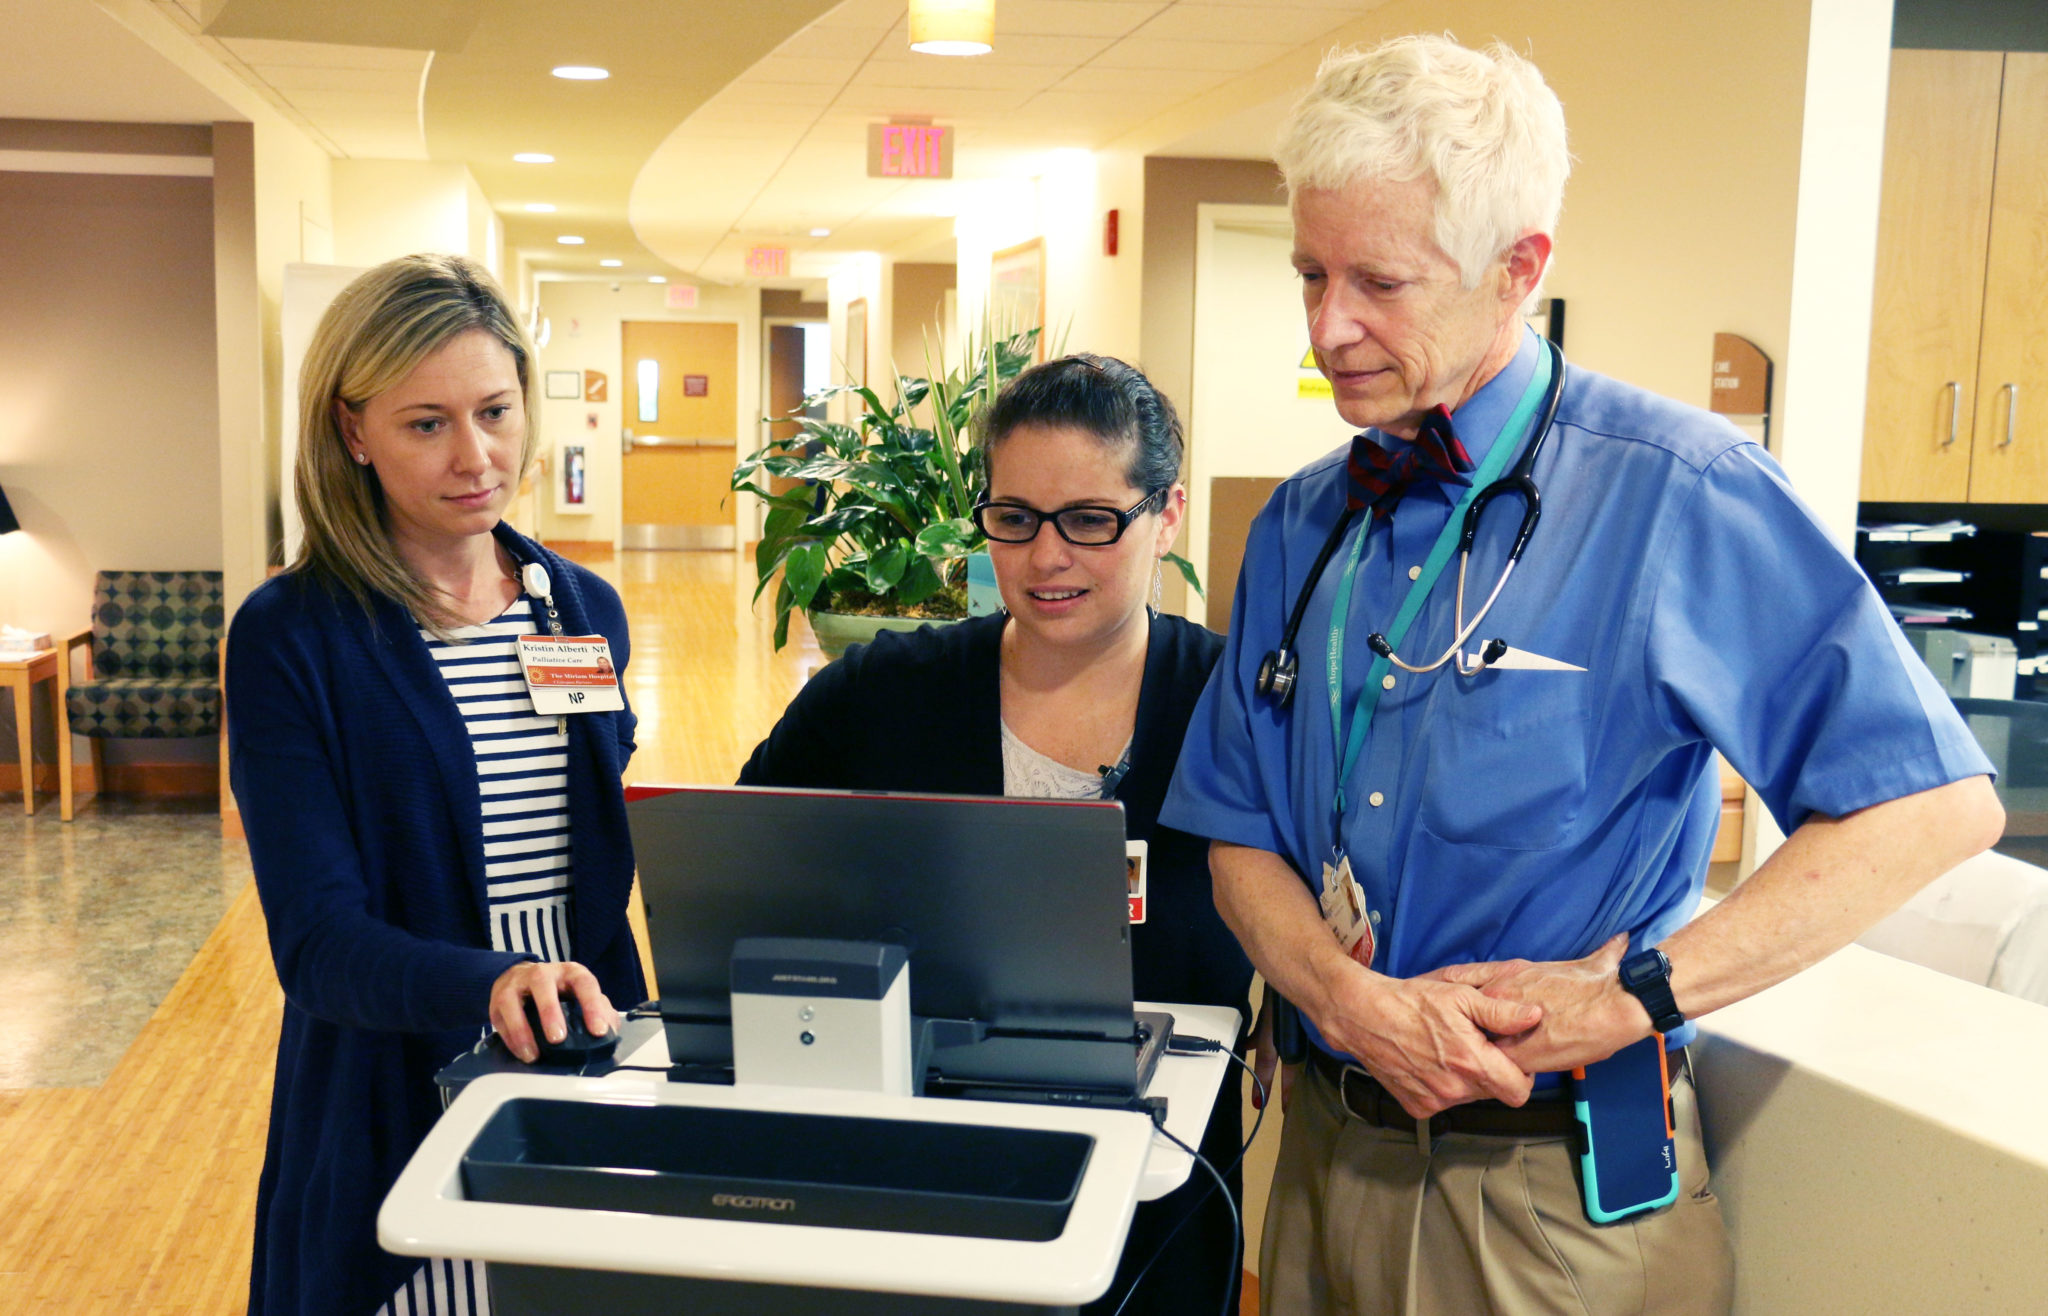 Two young women stand with an older man while reviewing a laptop in front of them